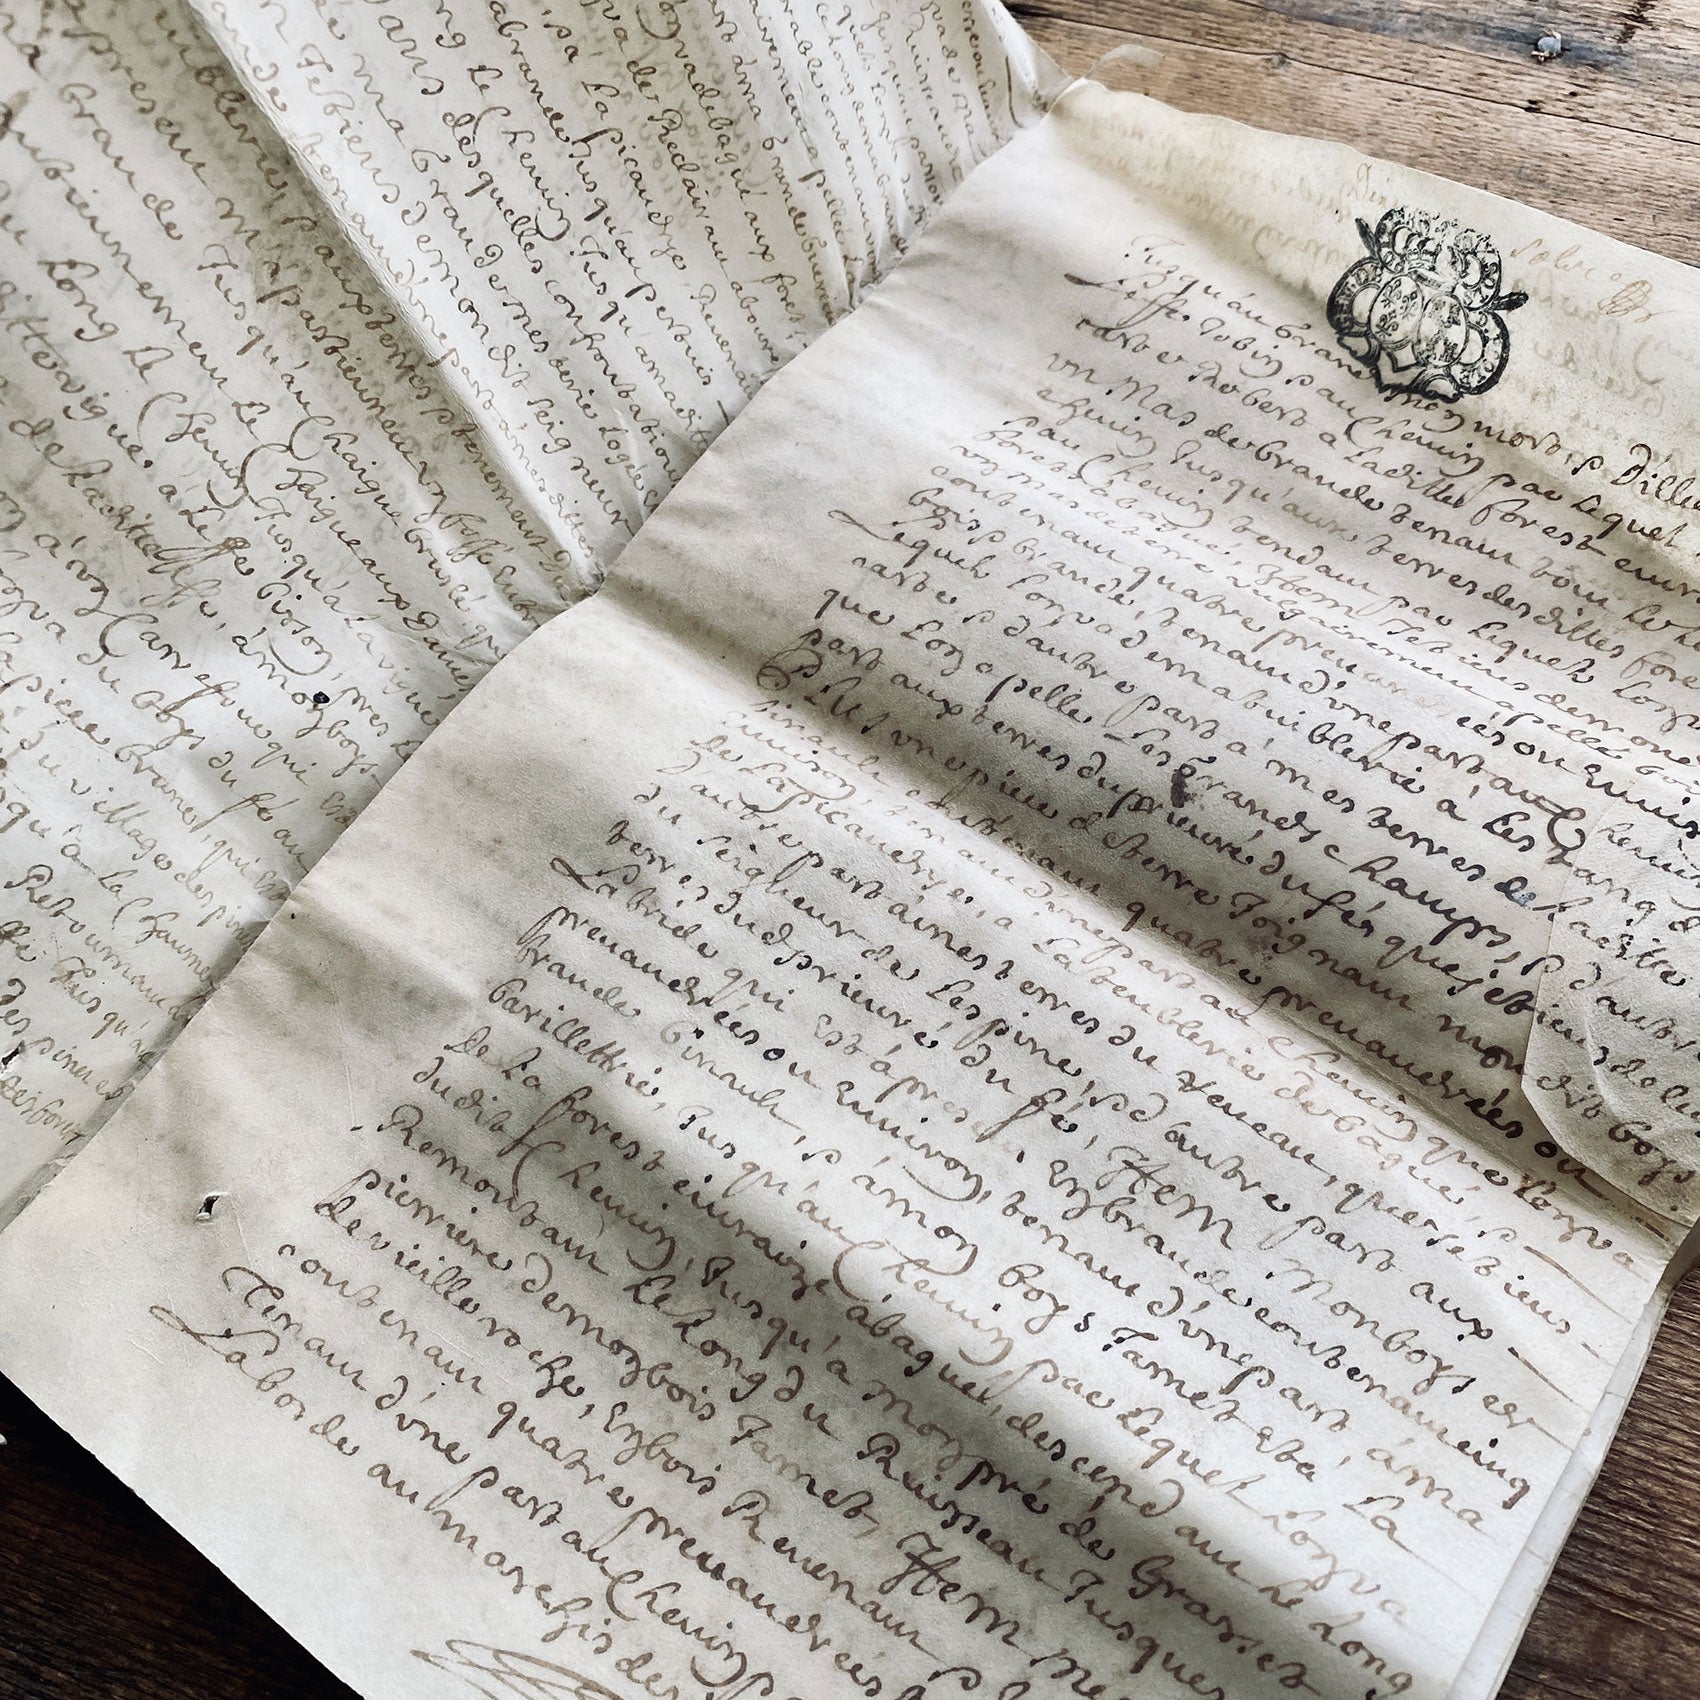 1688 Notarial French parchment (0711-05)